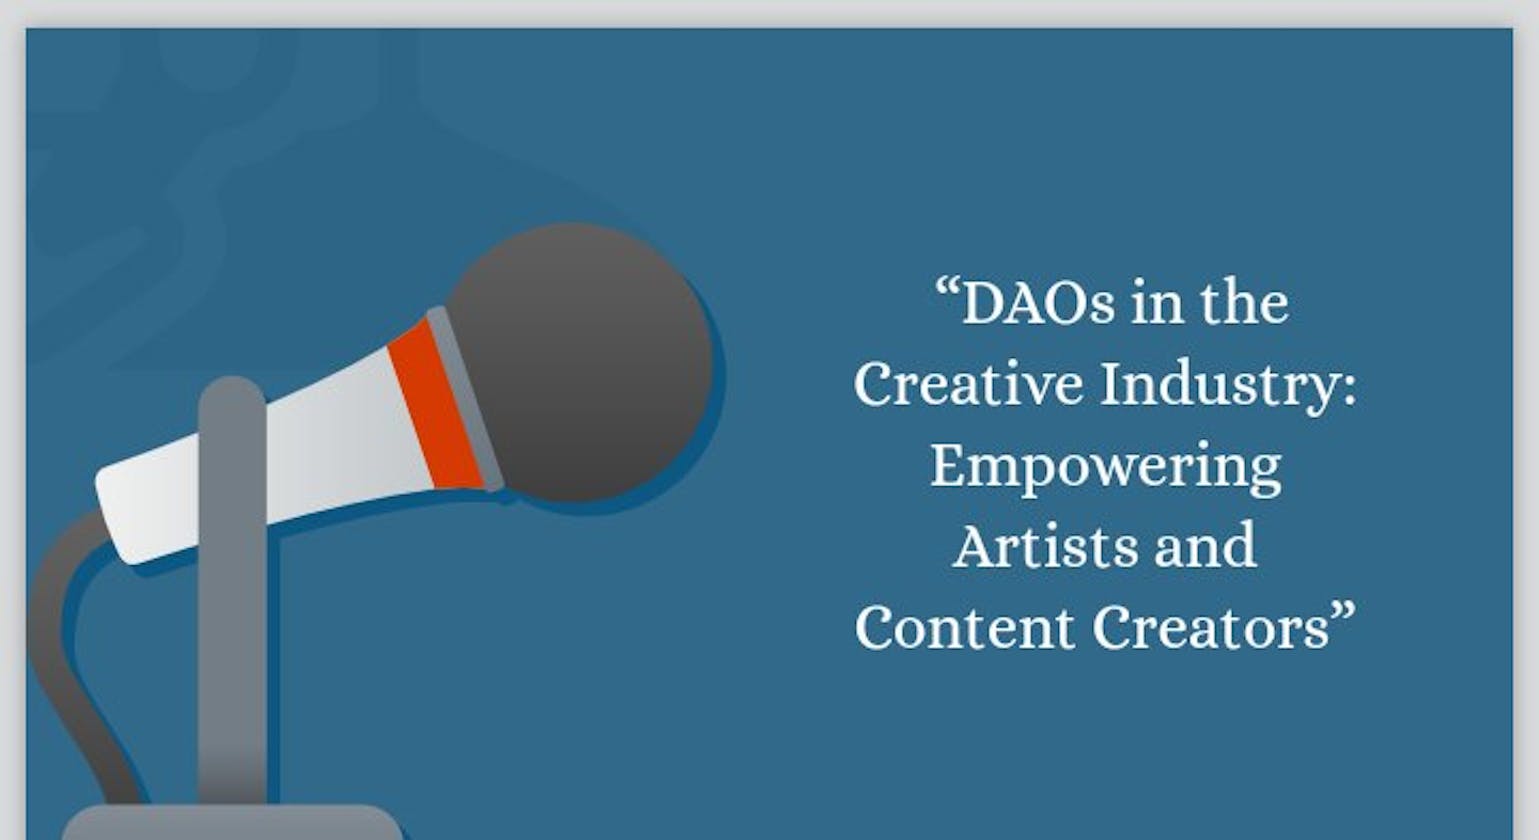 DAOs in the Creative Industry: Empowering Artists and Content Creators